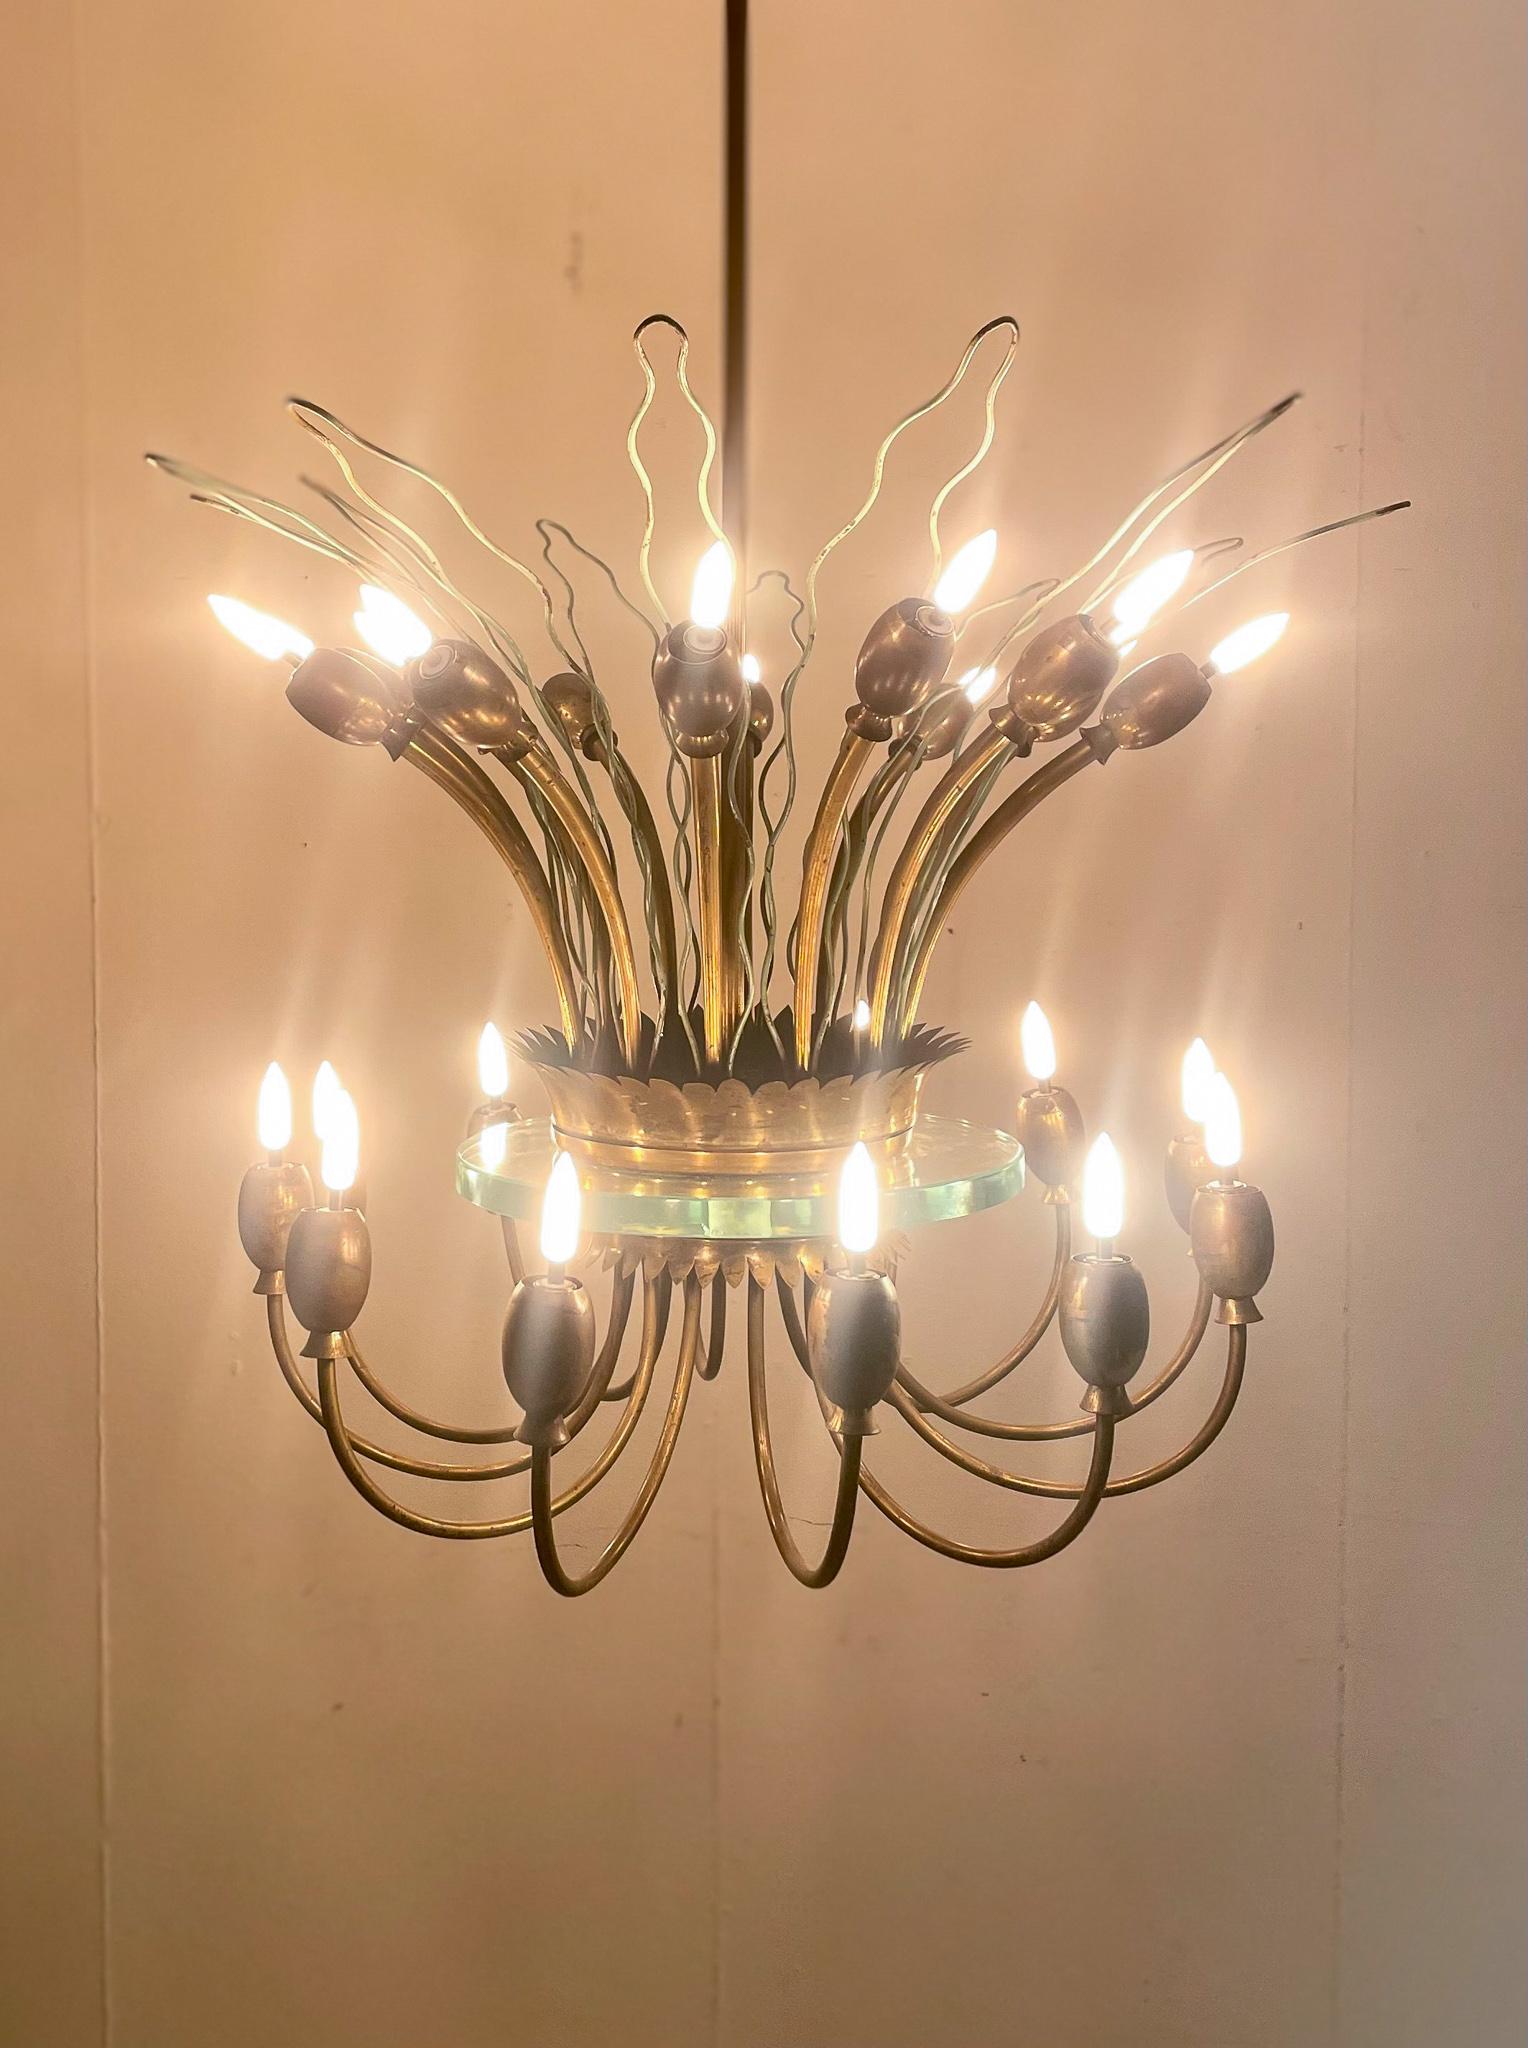 Mid-Century Modern Italian Chandelier, Metal Brass and Glass, Italy, 1950s For Sale 3